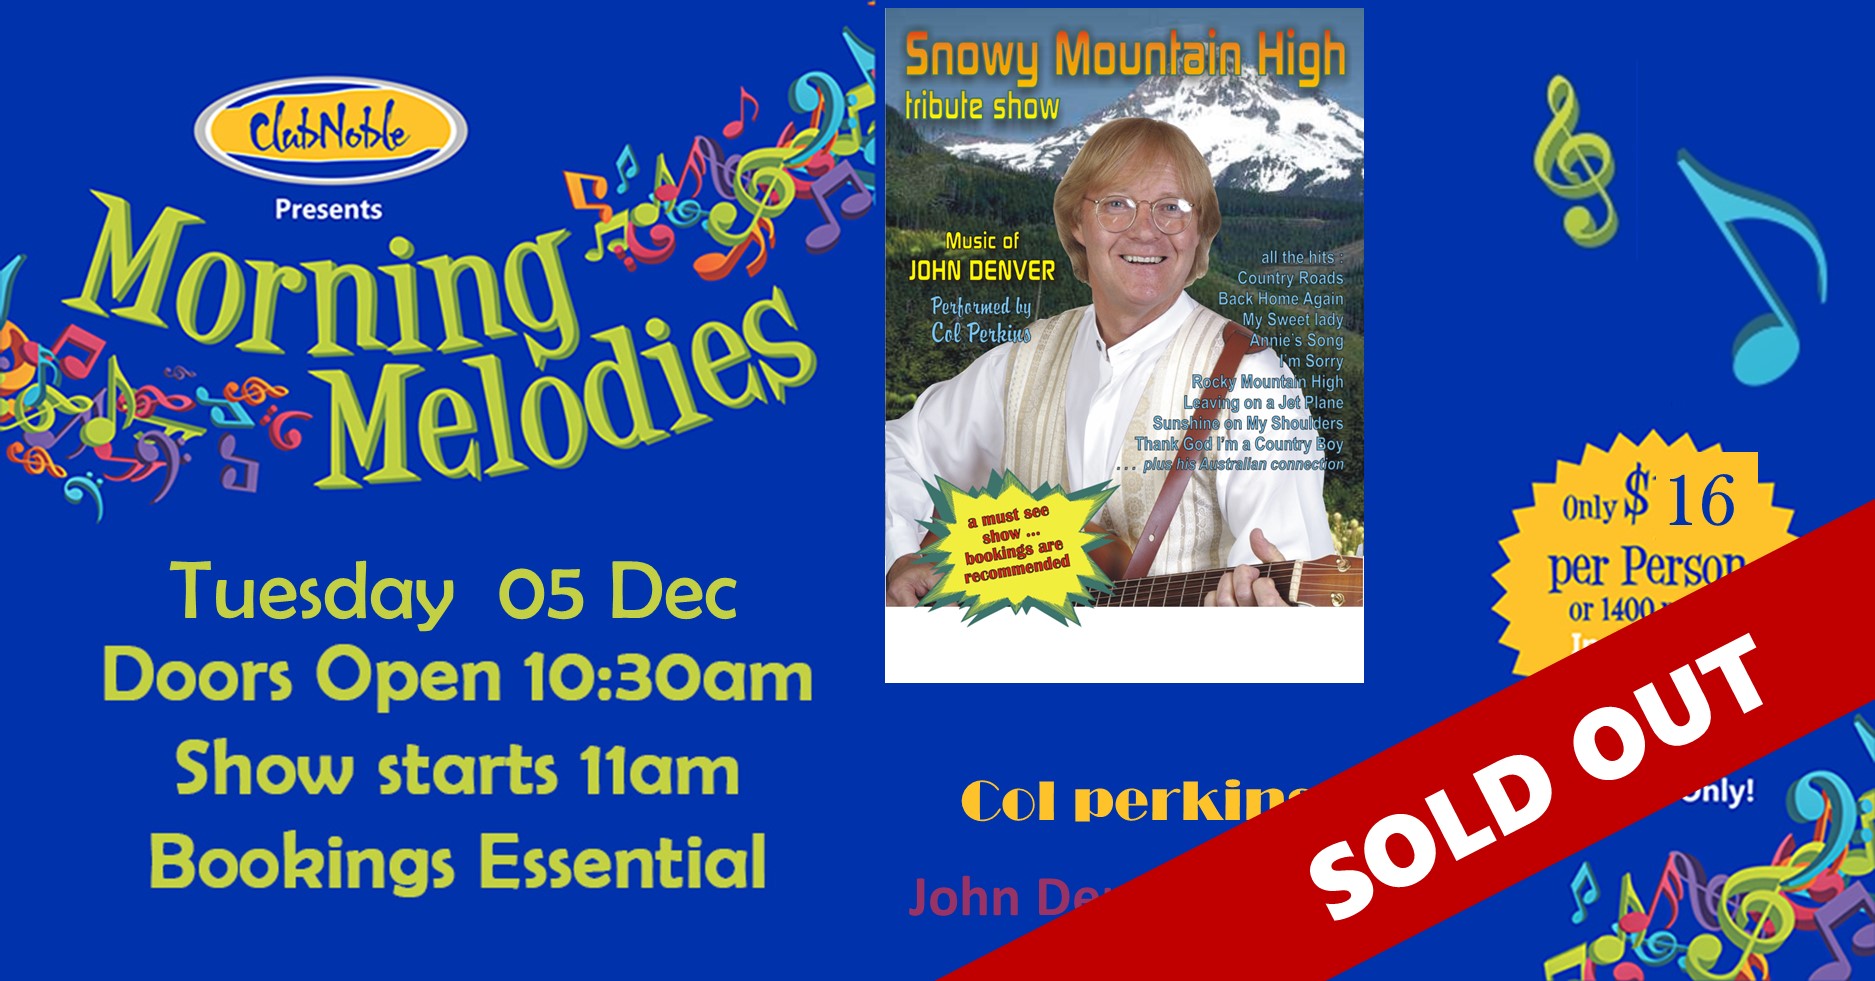 Morning Melodies Snowy Mountain High Tribute Show – The Music of John Denver.